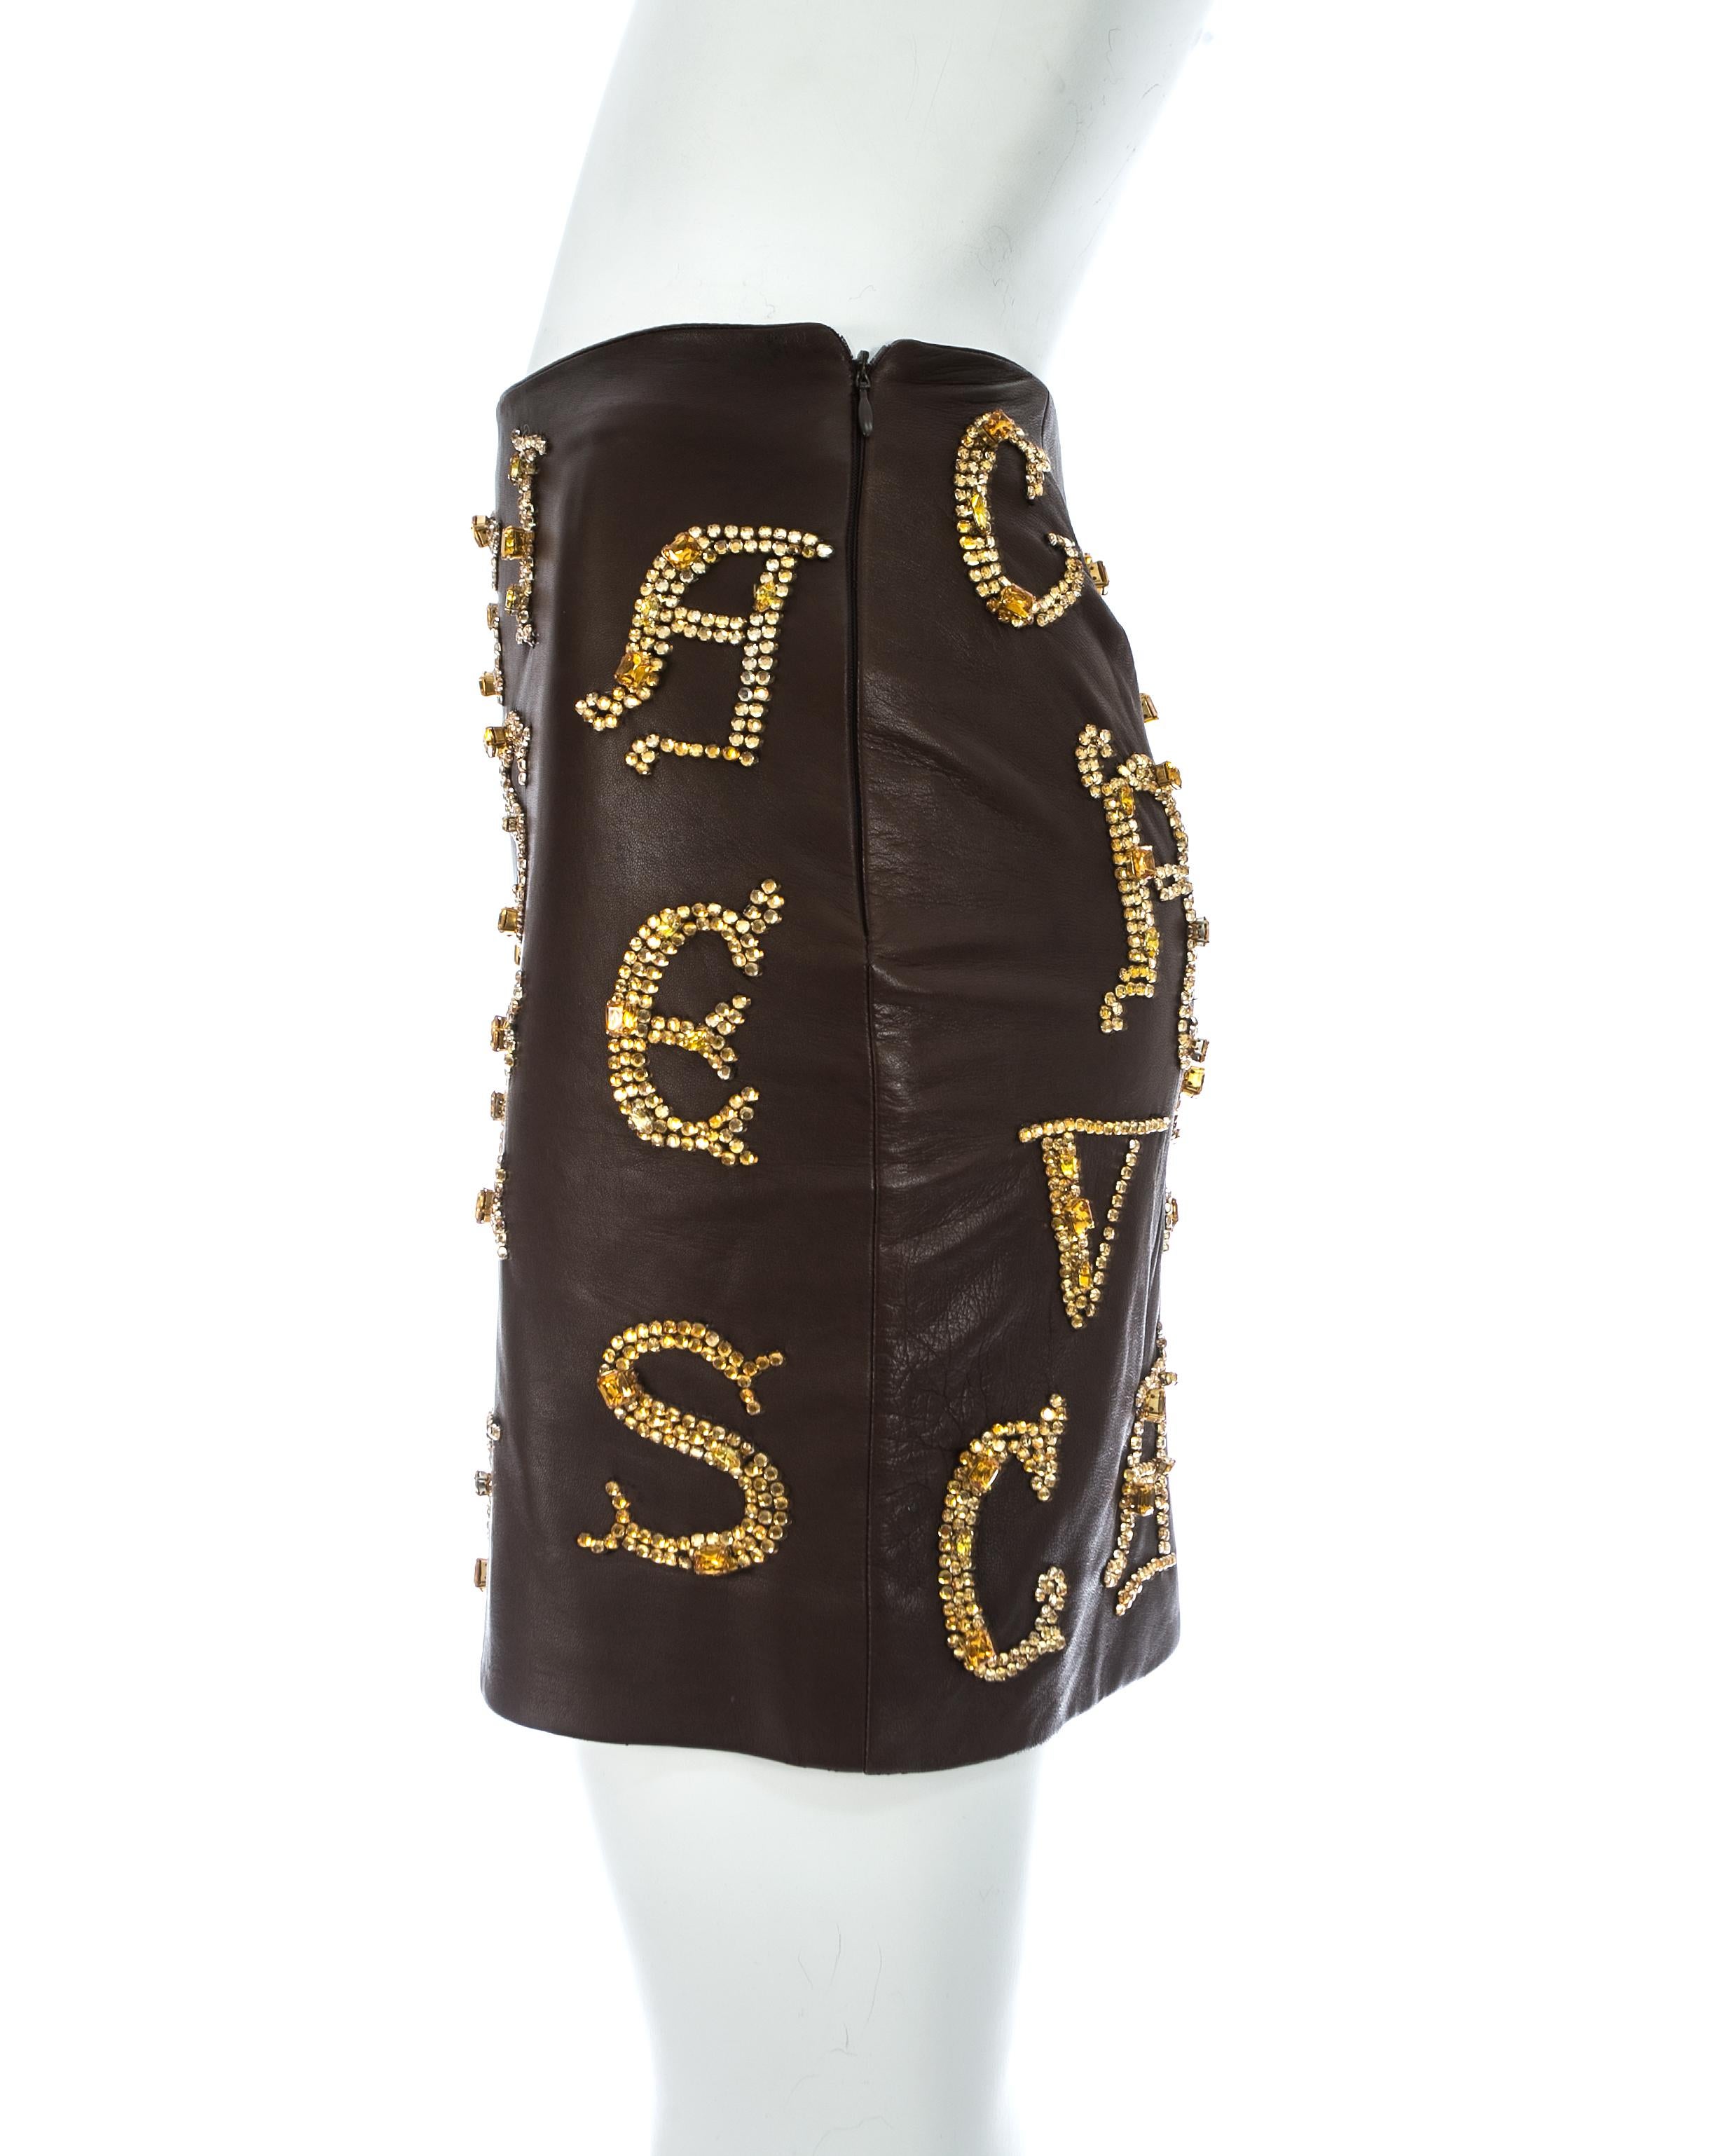 Gianni Versace brown leather skirt with gold crystal embellishment, fw 1997 1